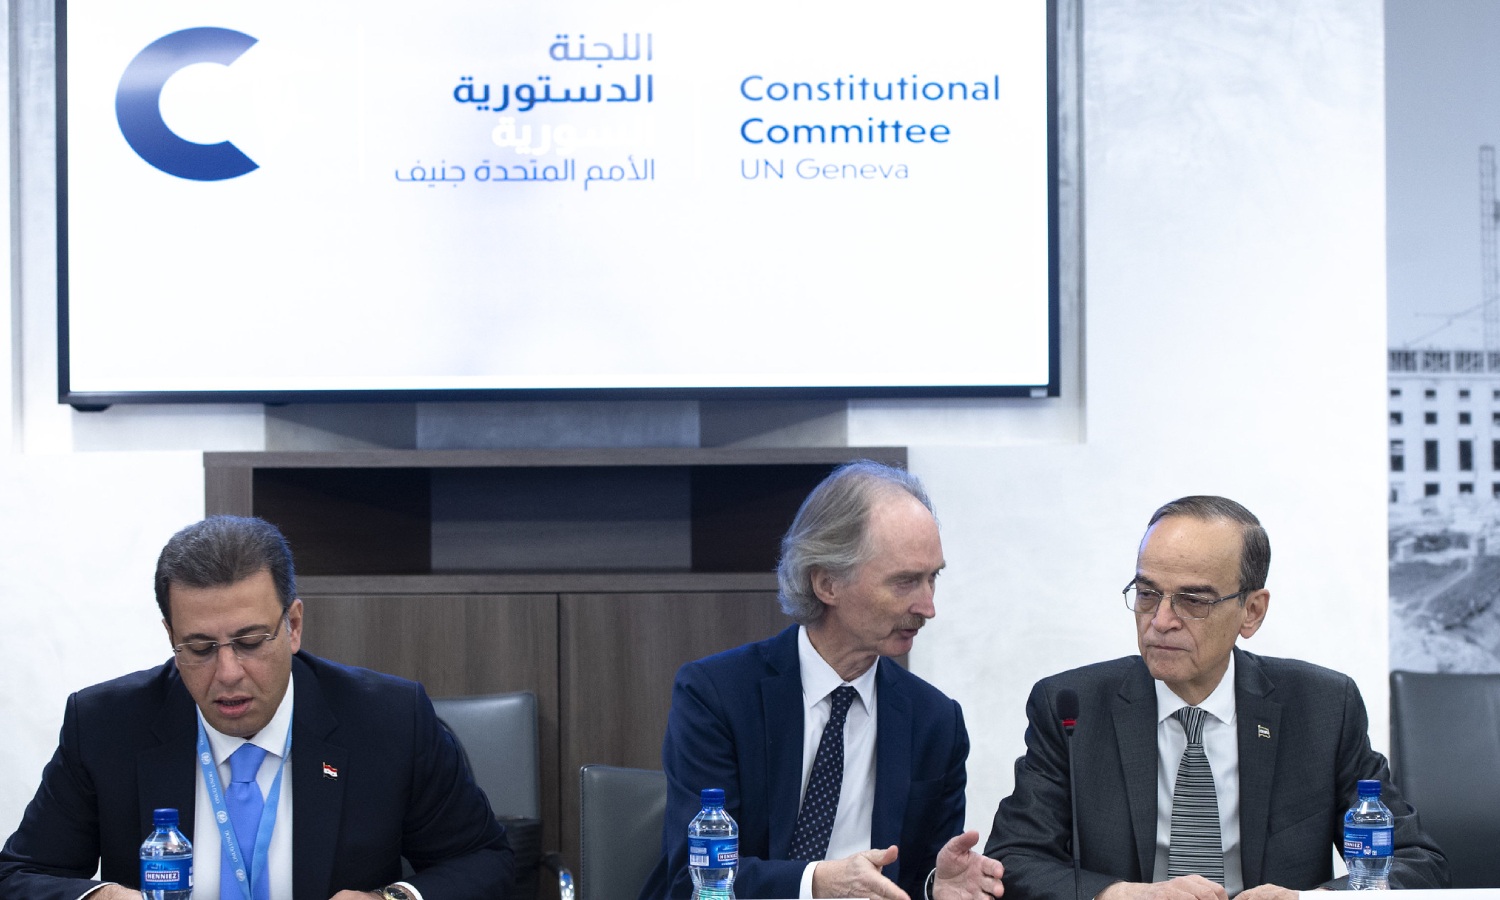  UN Special Envoy to Syria, Geir Pedersen and the two Joint Heads (Ahmad al-Kuzbari, from the regime delegation and Hadi al-Bahra, from the opposition delegation(United Nations)